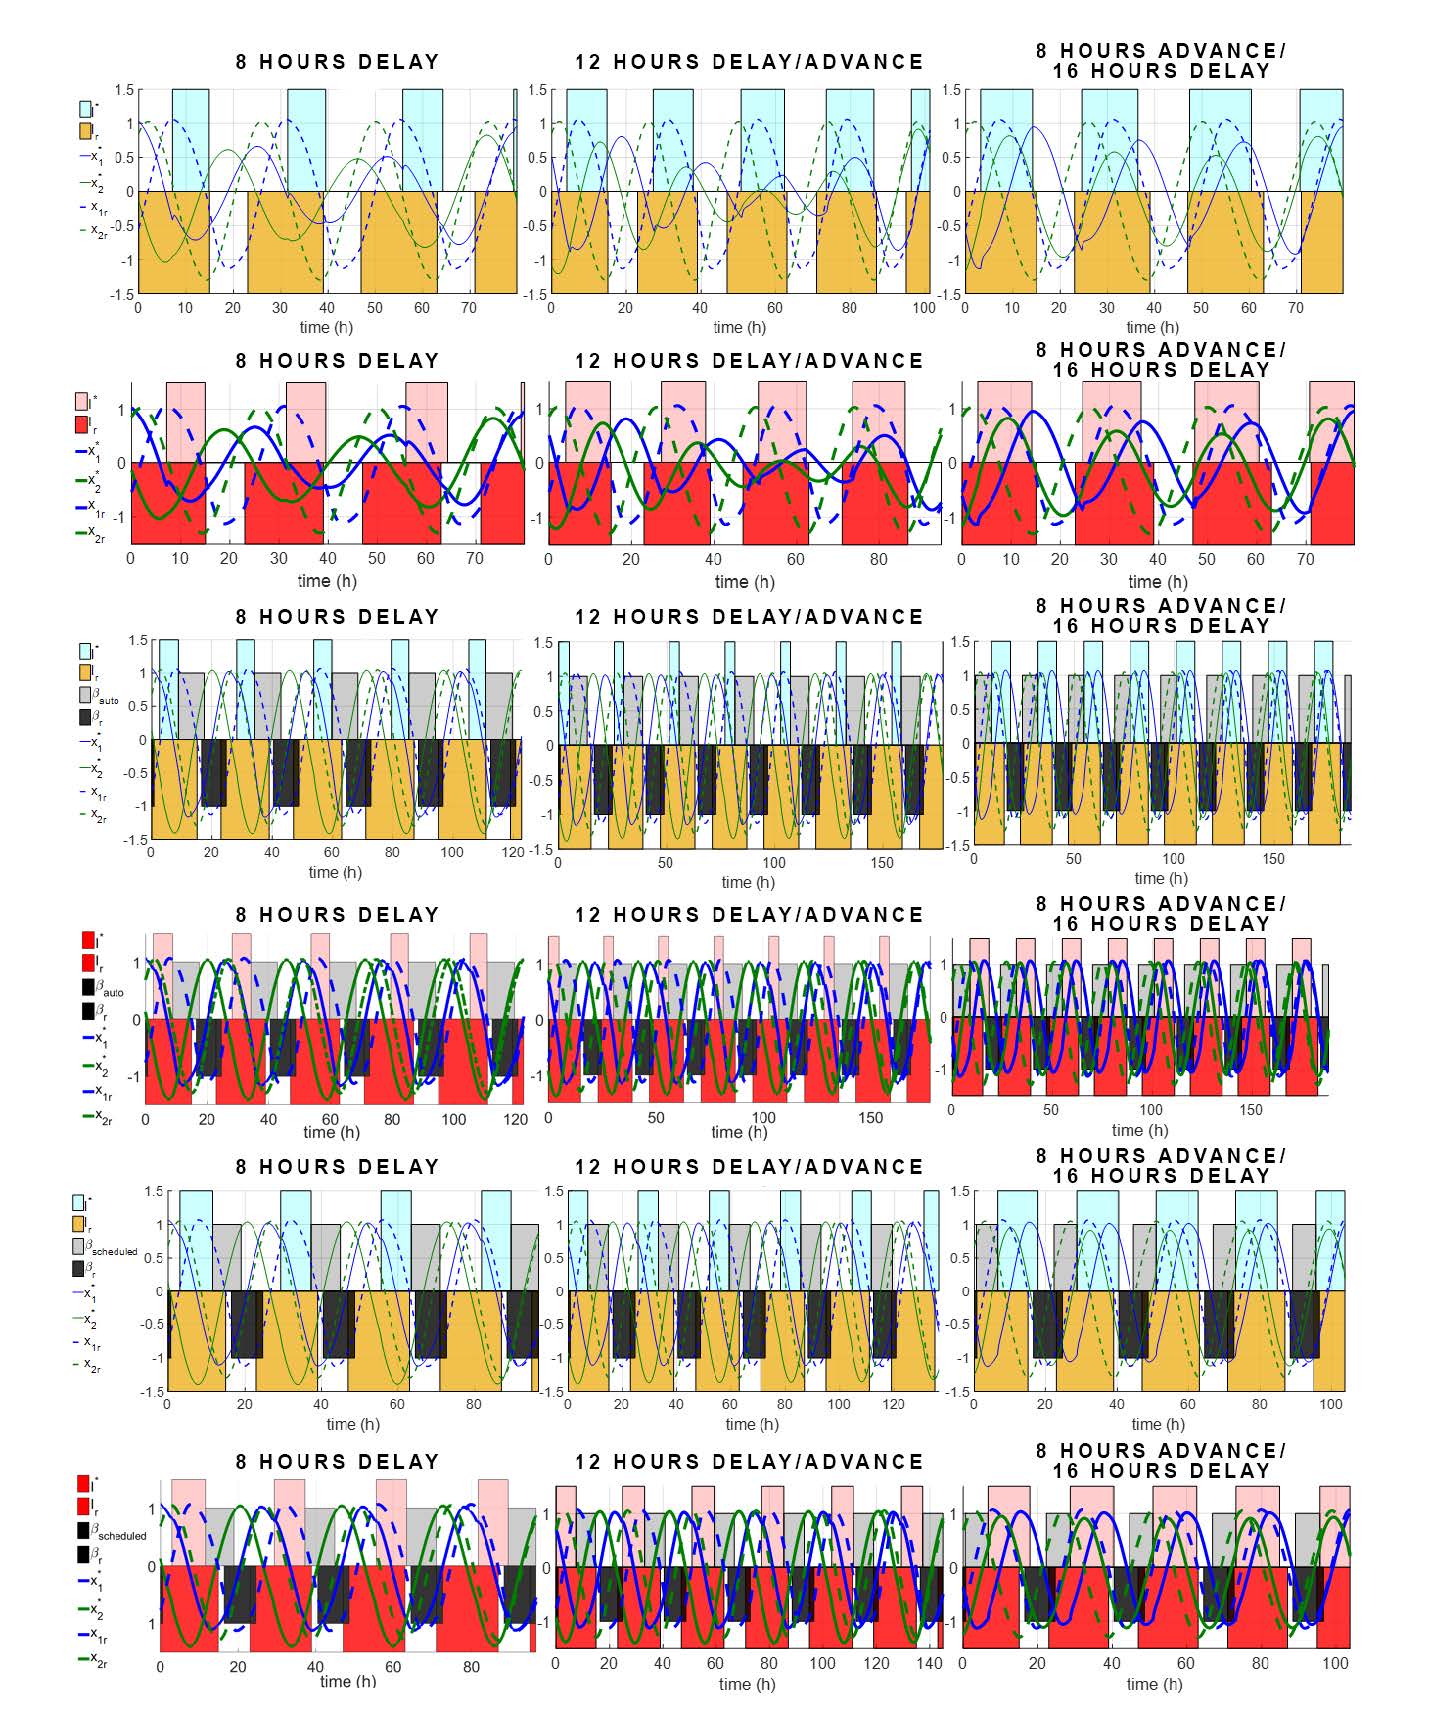 Figure 2. Solutions of QEP (top row), QEP-A (middle row), and QEP-S (bottom row), for various jetlag cases. All simulations are run until entrainment. Pink bands represent when the optimal control input (lighting) is on. Red bands represent when the natural (reference) daylight is on (assuming 16h/8h light/dark pattern). Light gray bands represent the sleep intervals of the subject. Dark gray bands represent the sleep intervals of the reference.